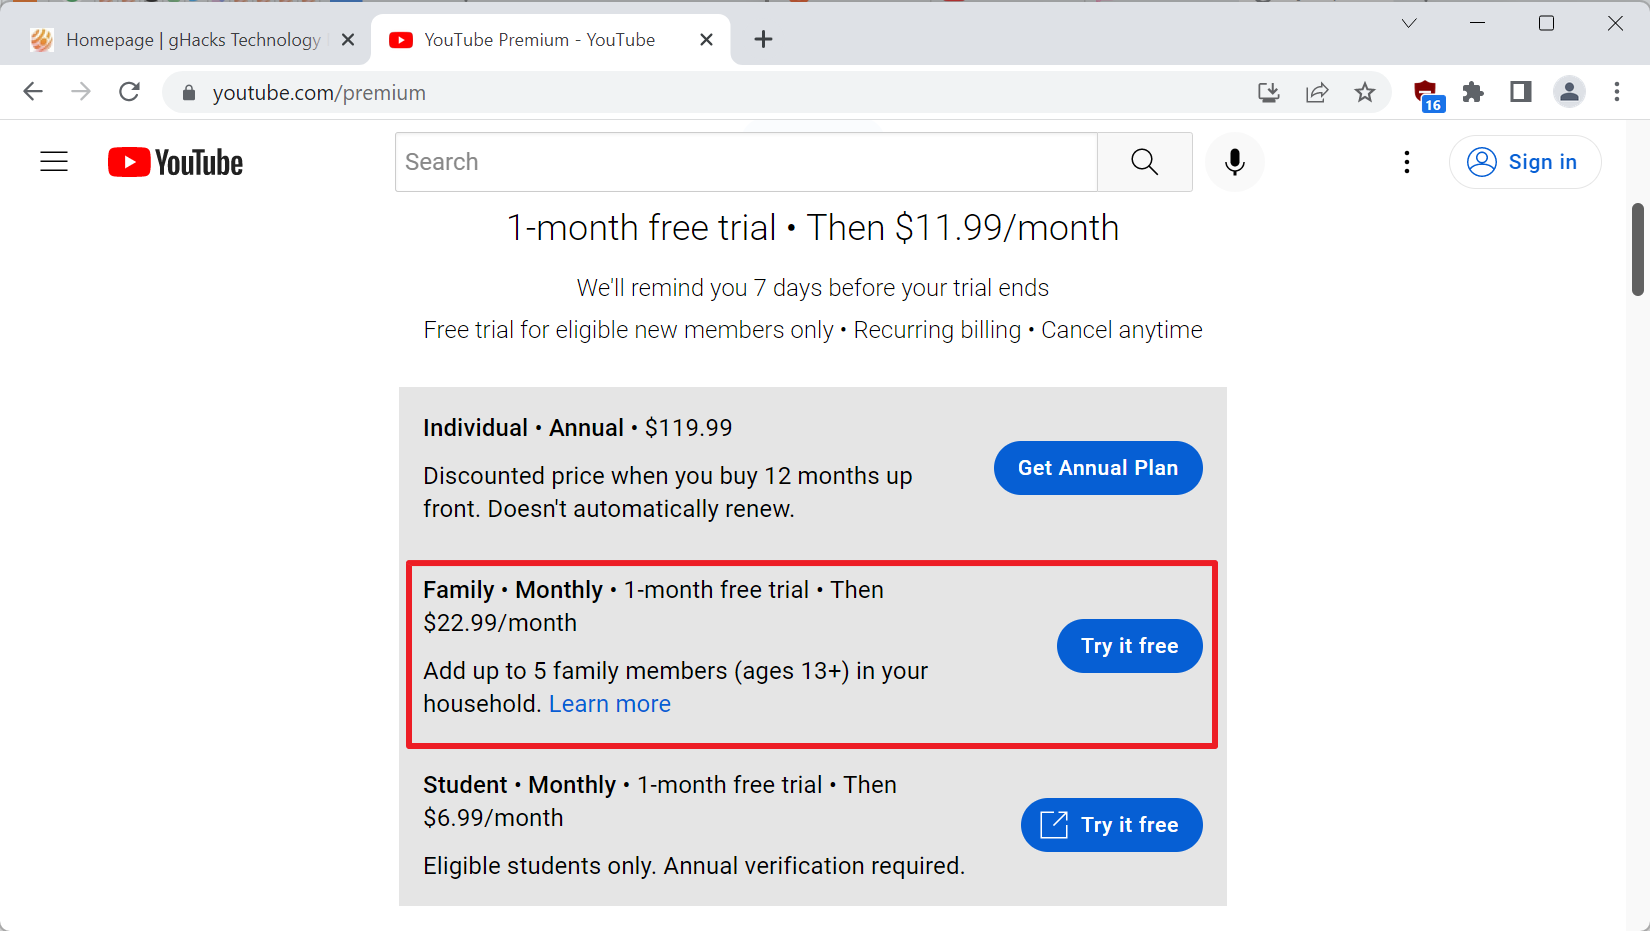 Google is increasing the price of YouTube Premium Family significantly